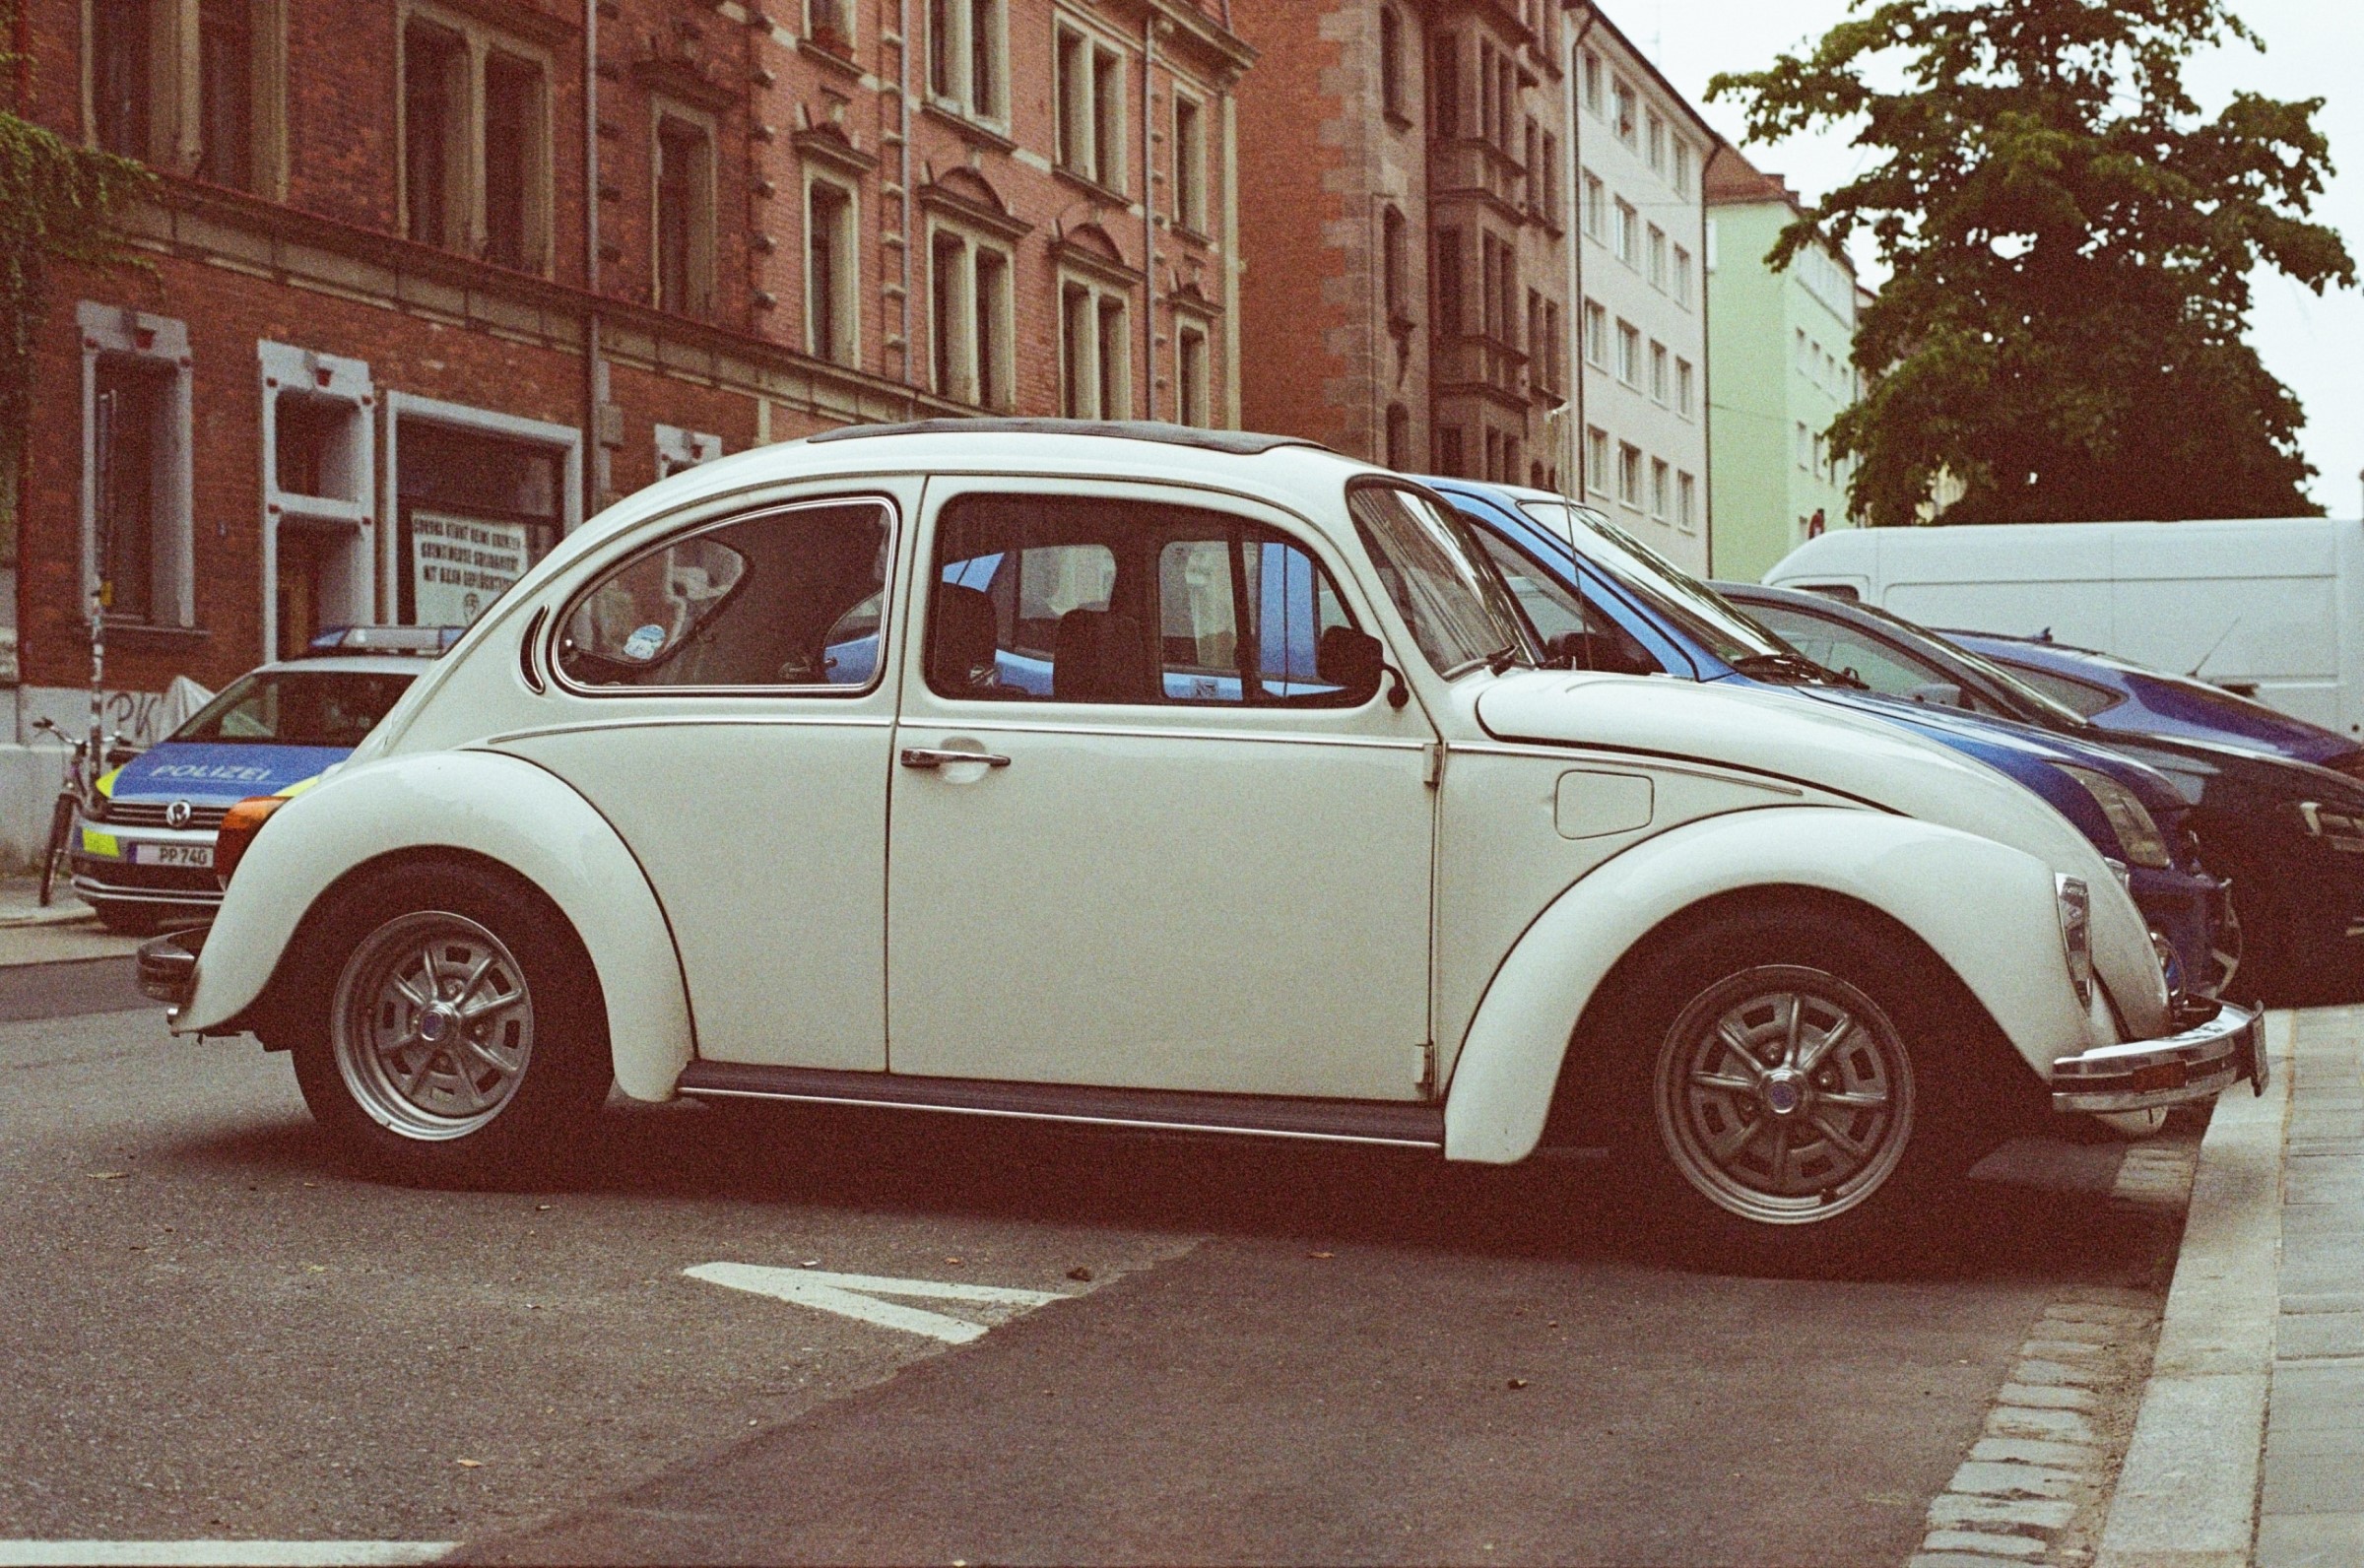 2400x1592px image of a white beetle car, Size 1.19mb